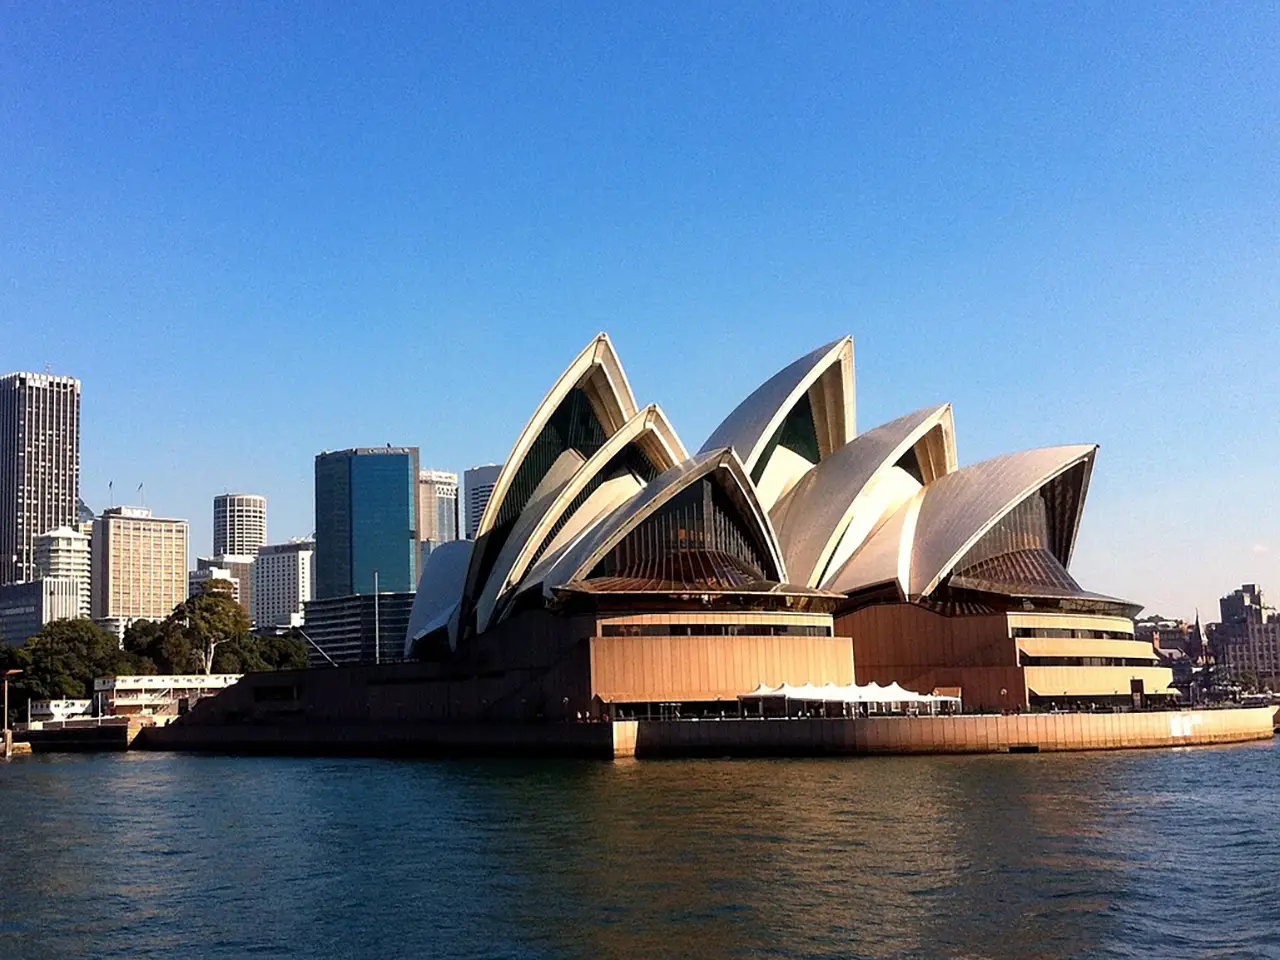 Sydney Opera House. Board a harbor cruise or ferry and take pictures while you travel by. the Opera House.